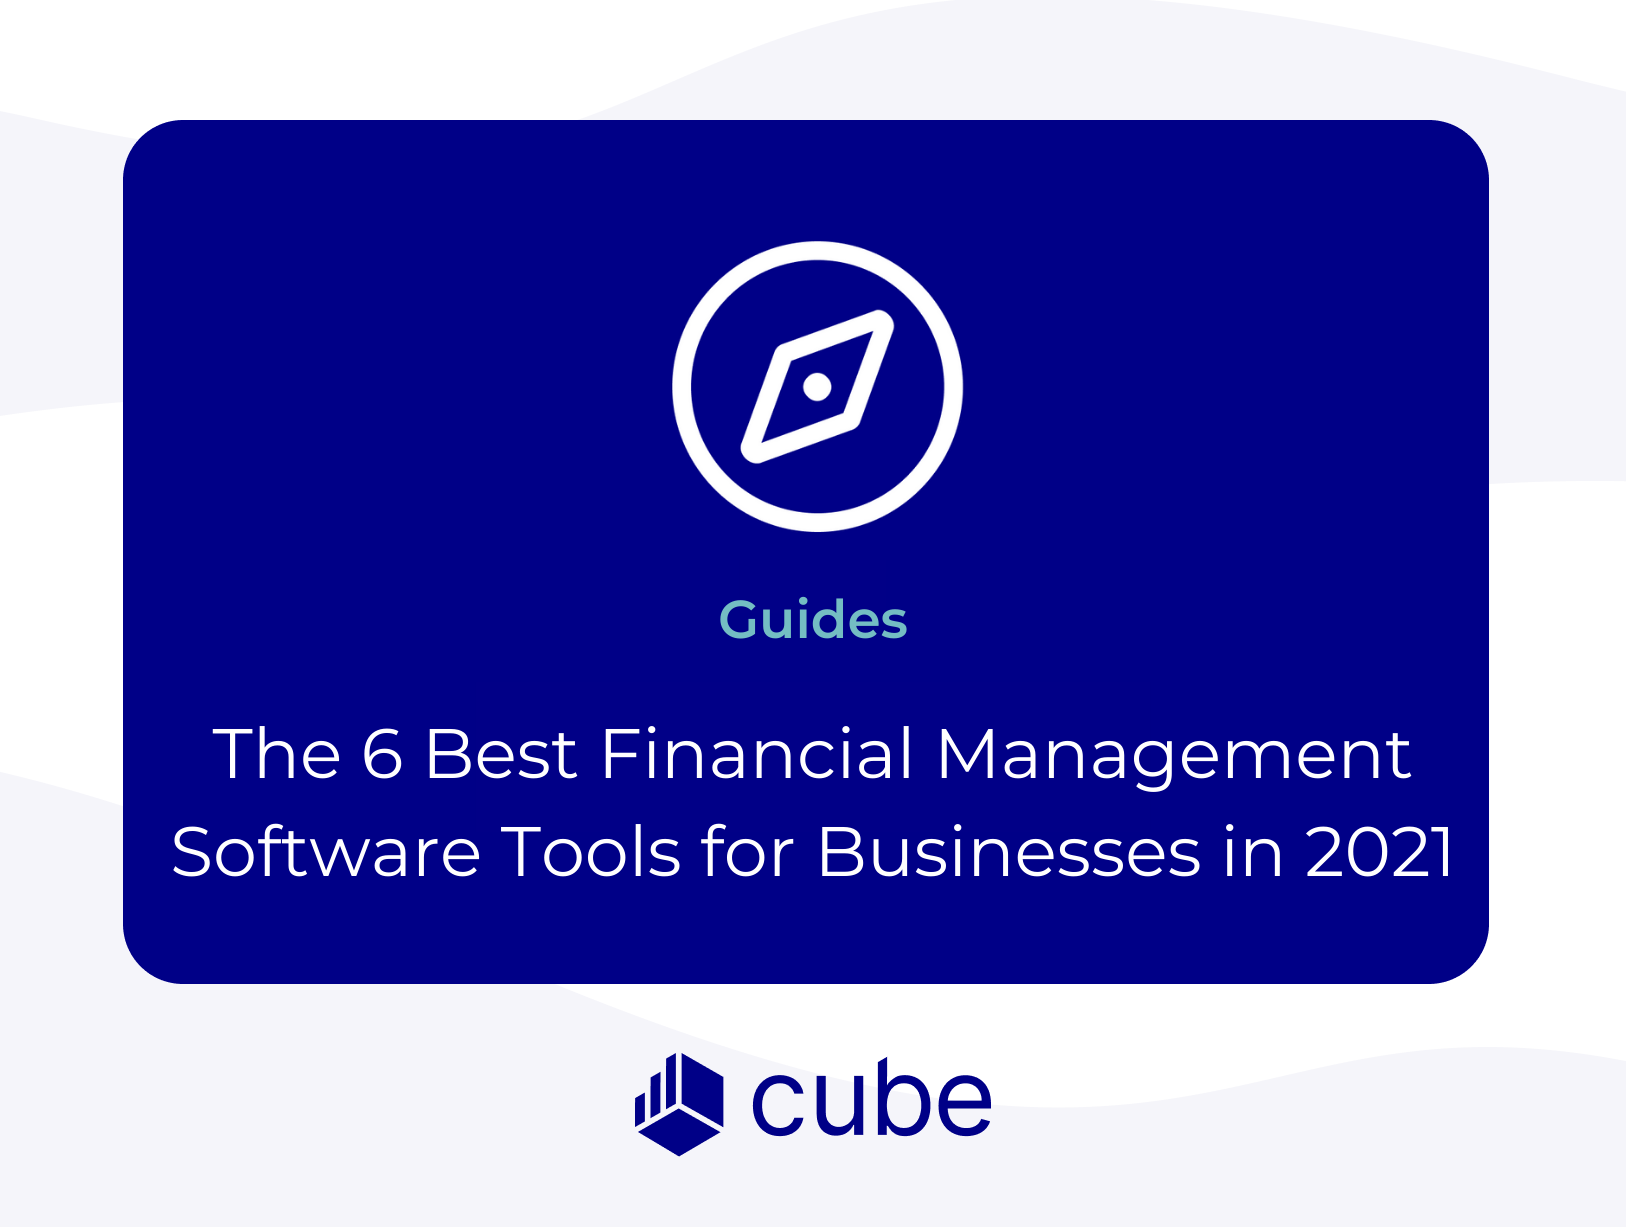 The 6 Best Financial Management Software Tools for Businesses in 2021